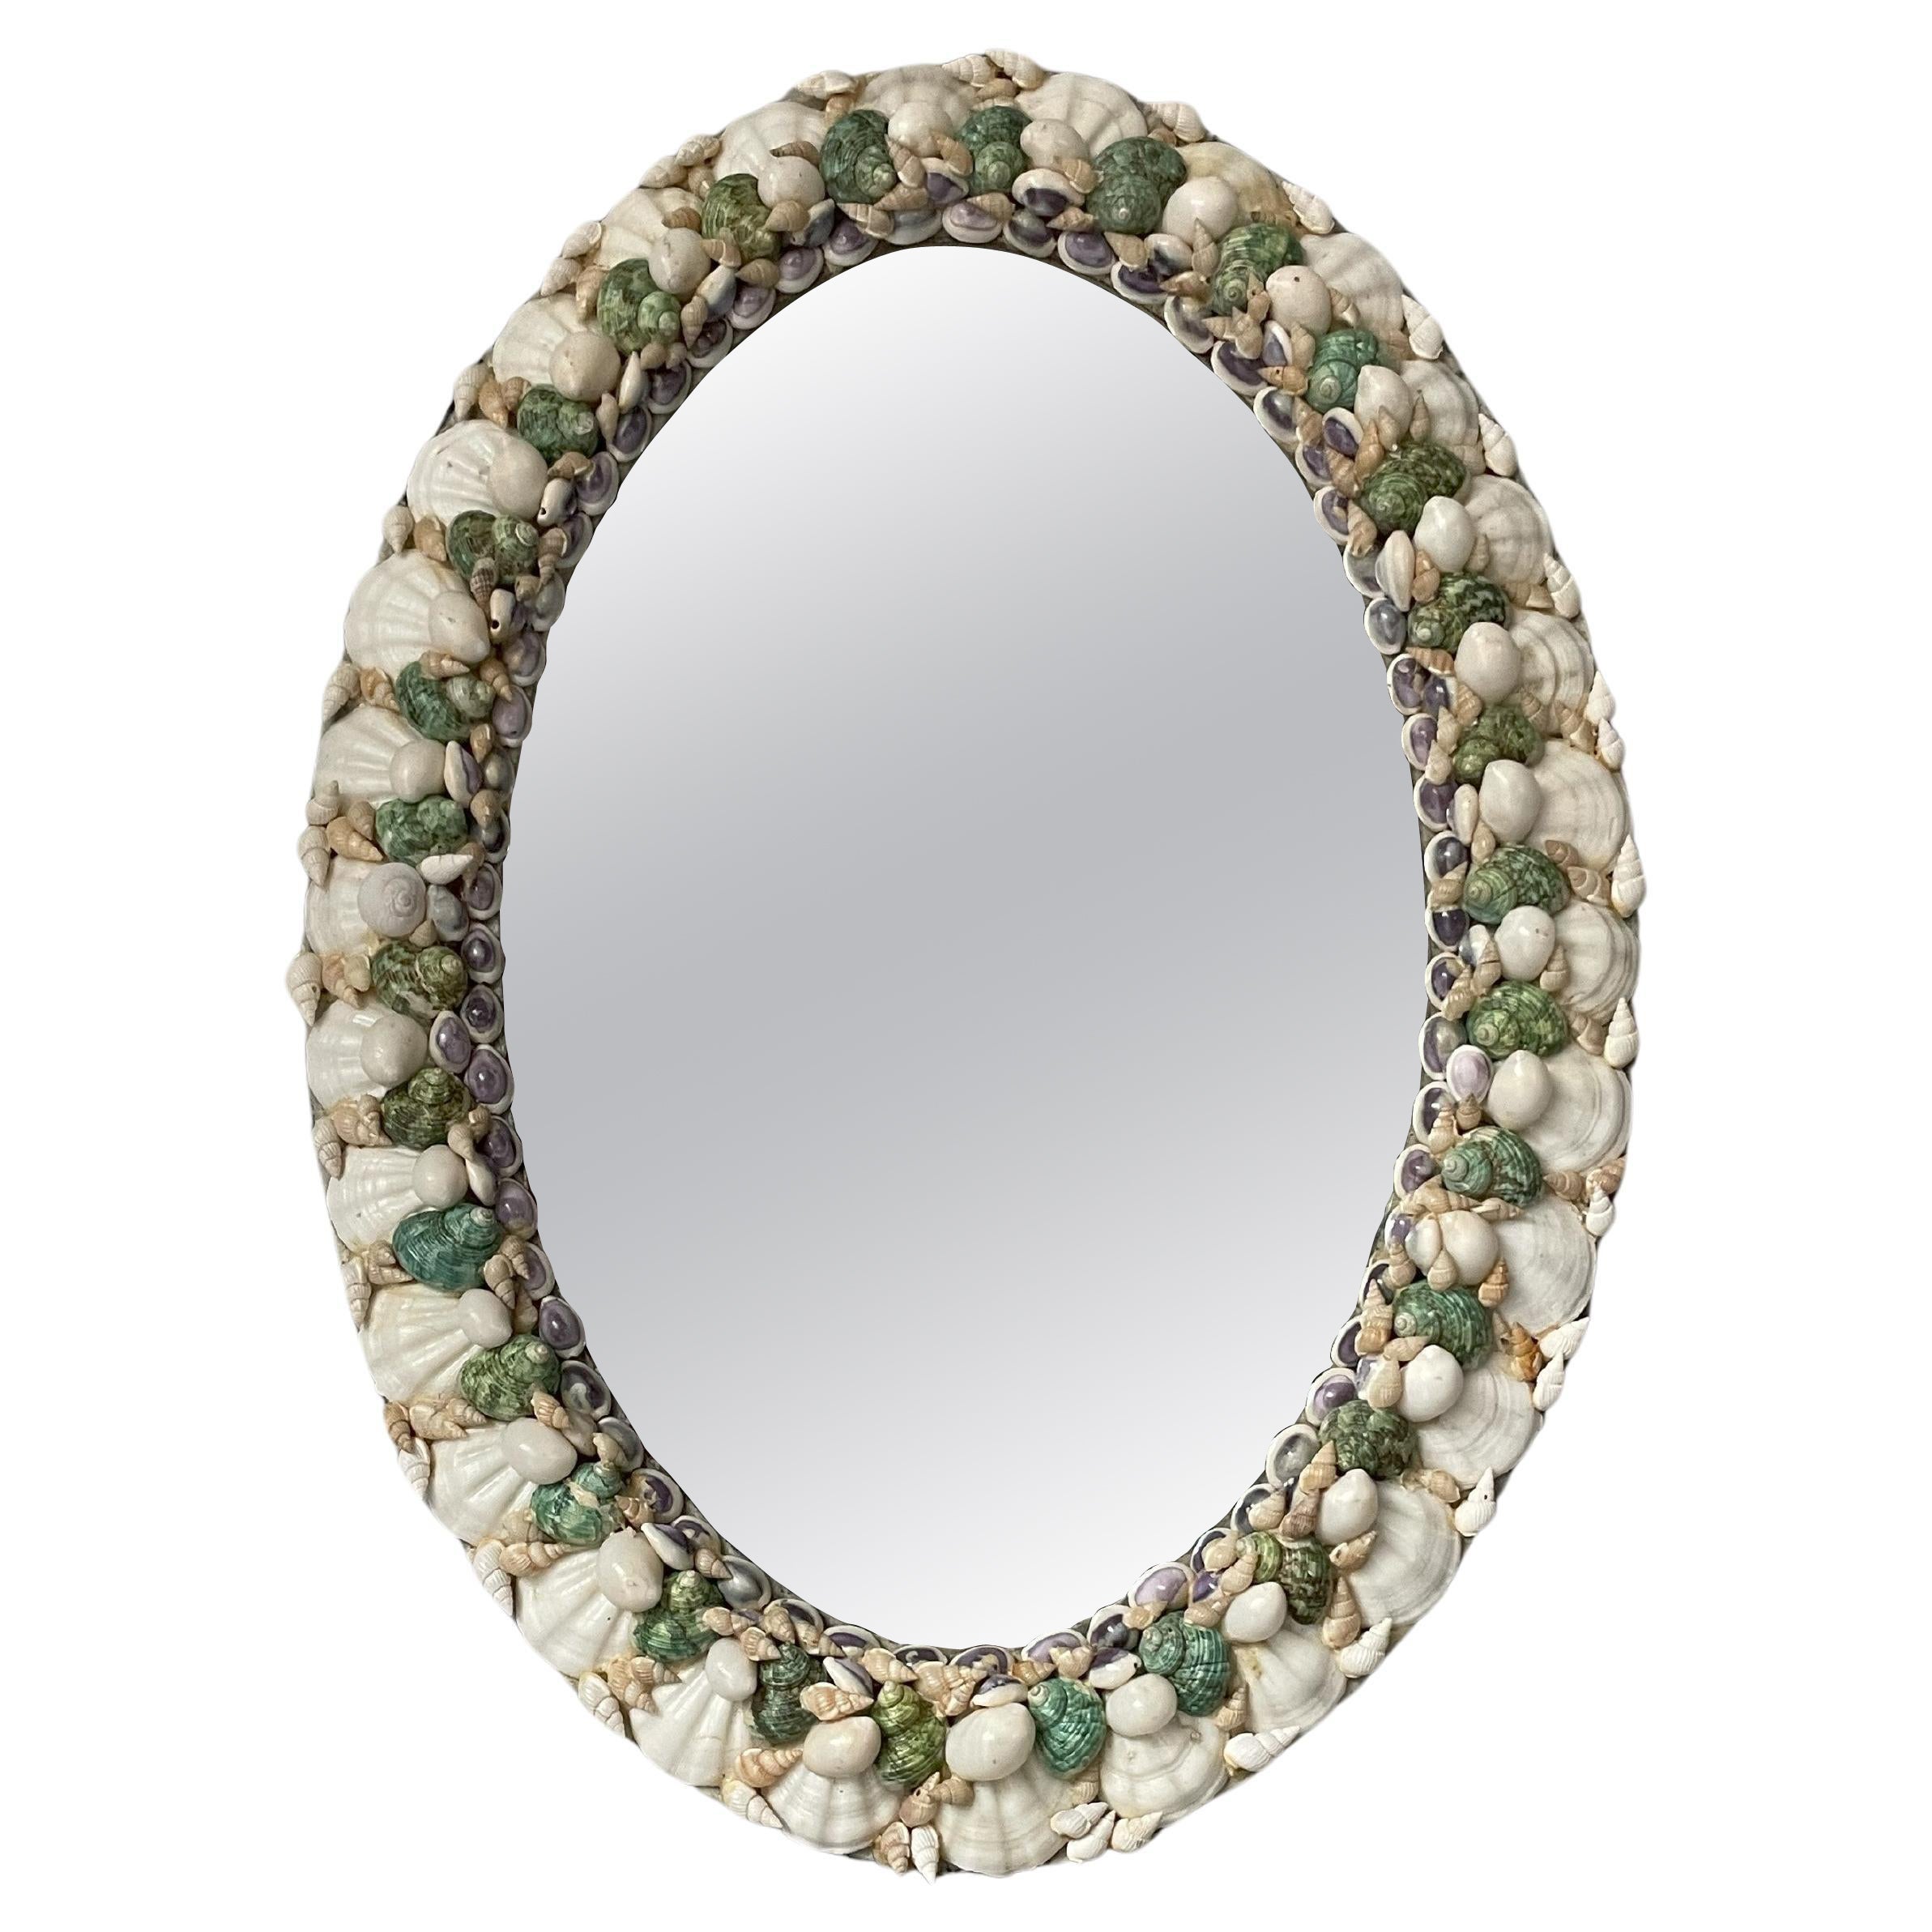 Oval shell mirror